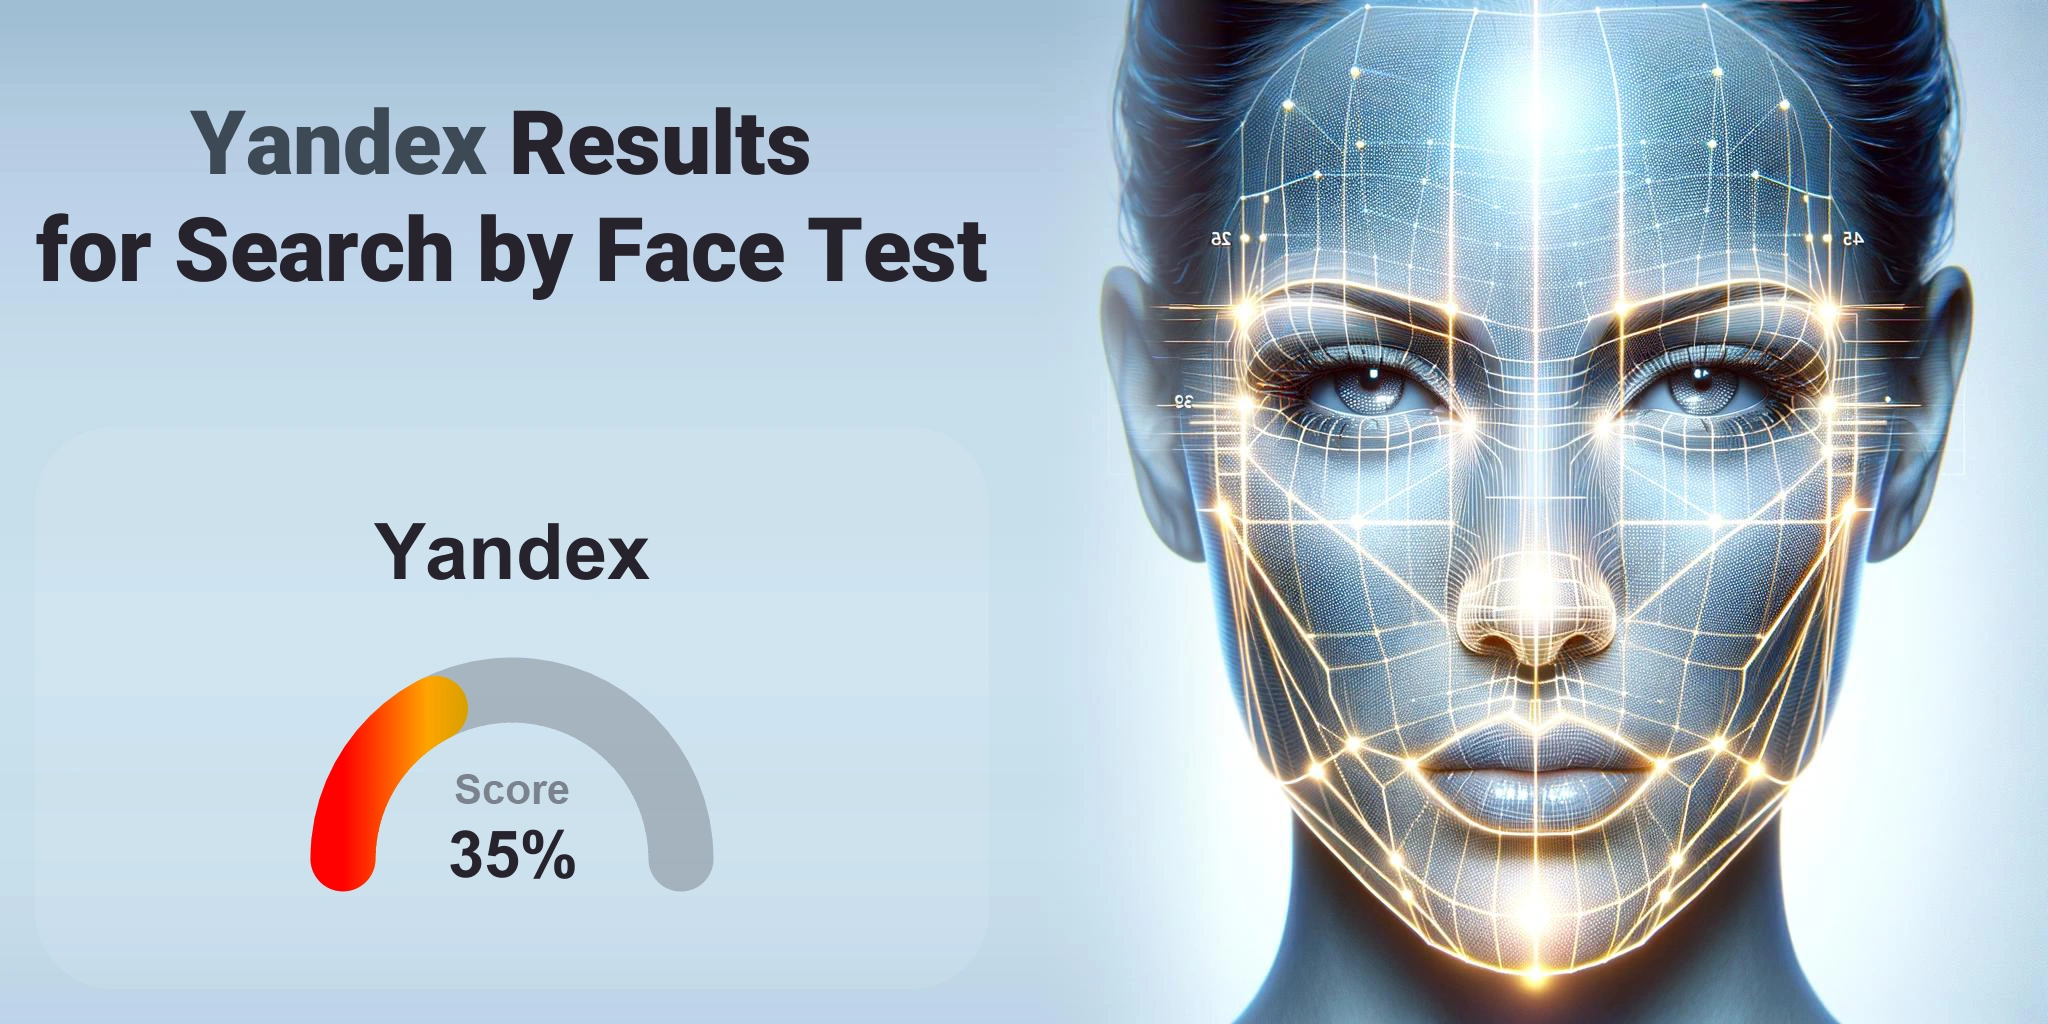 Is Yandex the Best for Face Search?